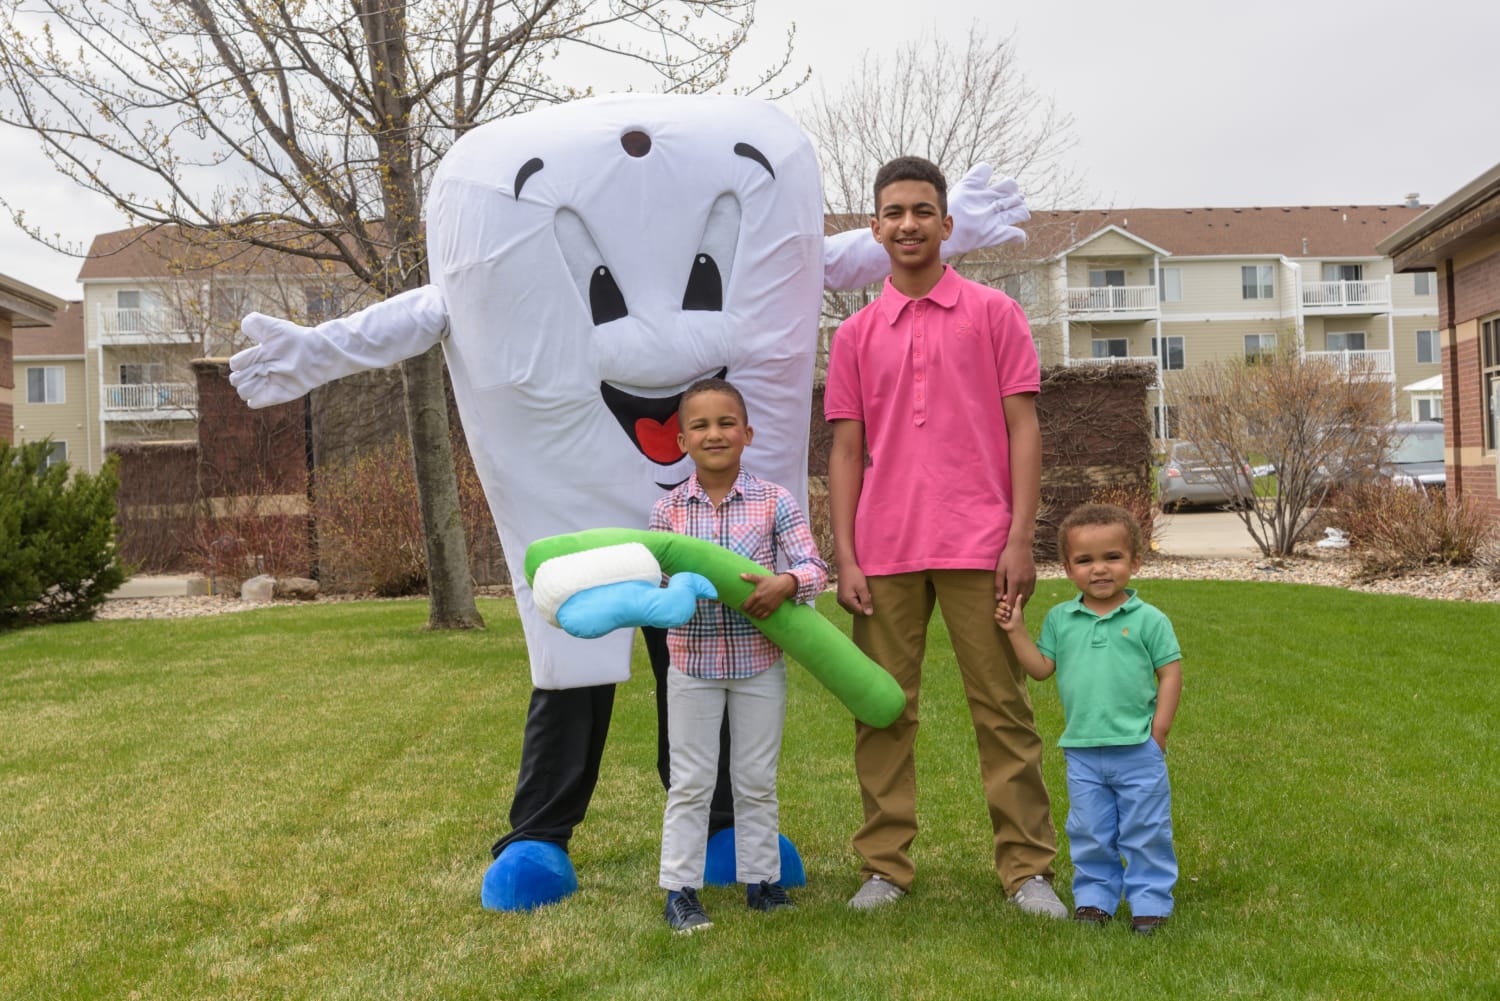 3 kids standing with person dressed up as tooth